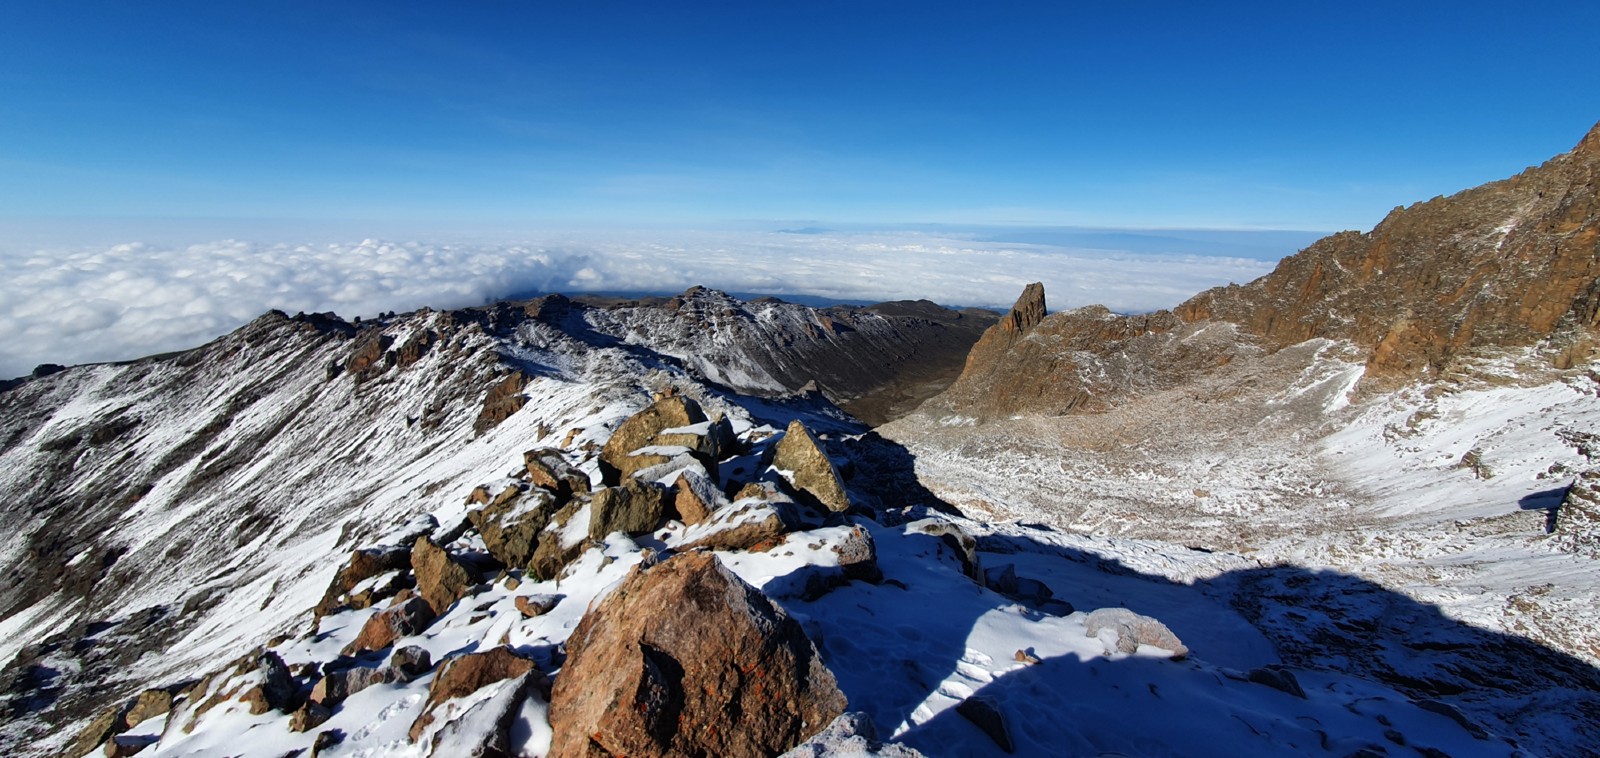 A photo of the summit of Mount Kenya with blue skies and snow-capped mountains